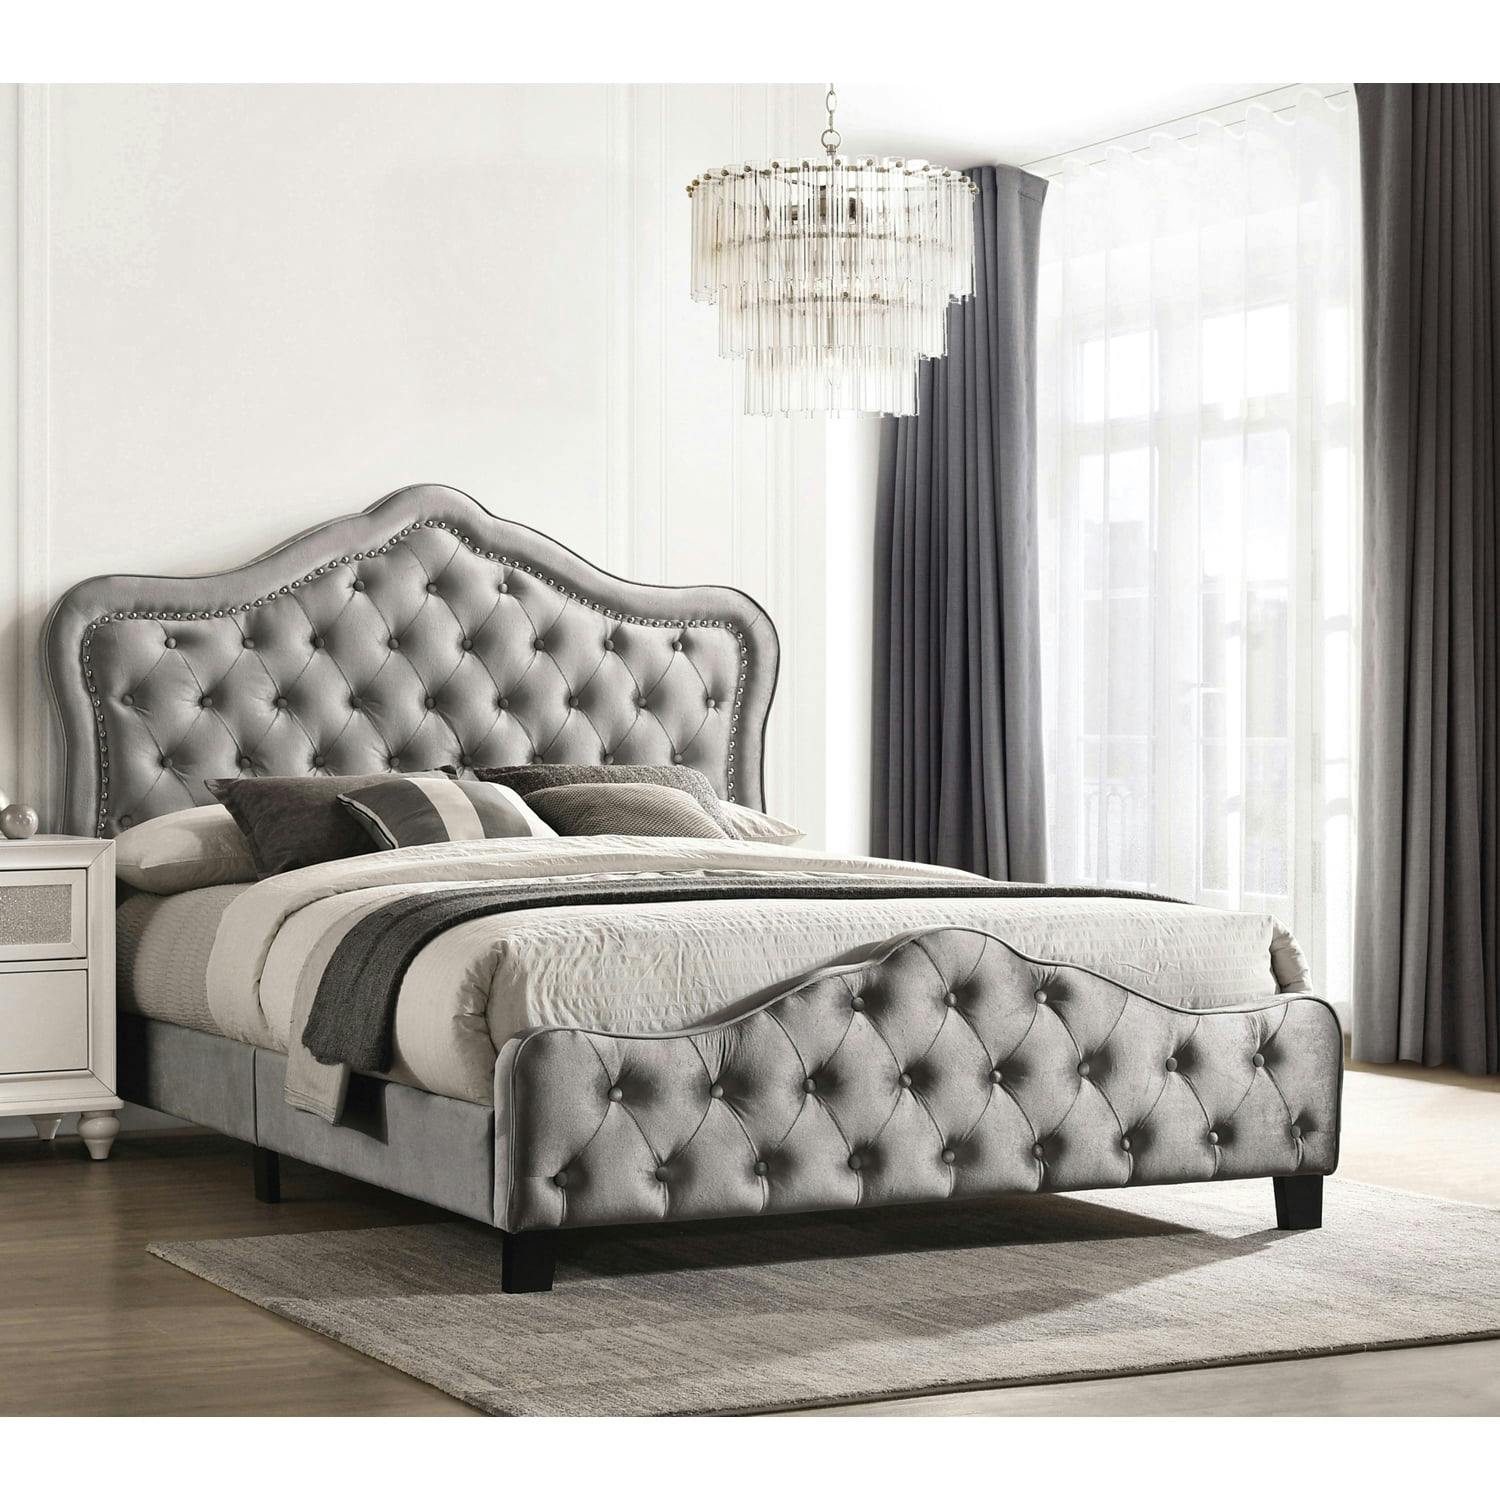 Transitional King-Size Gray Faux Leather Upholstered Bed with Nailhead Trim